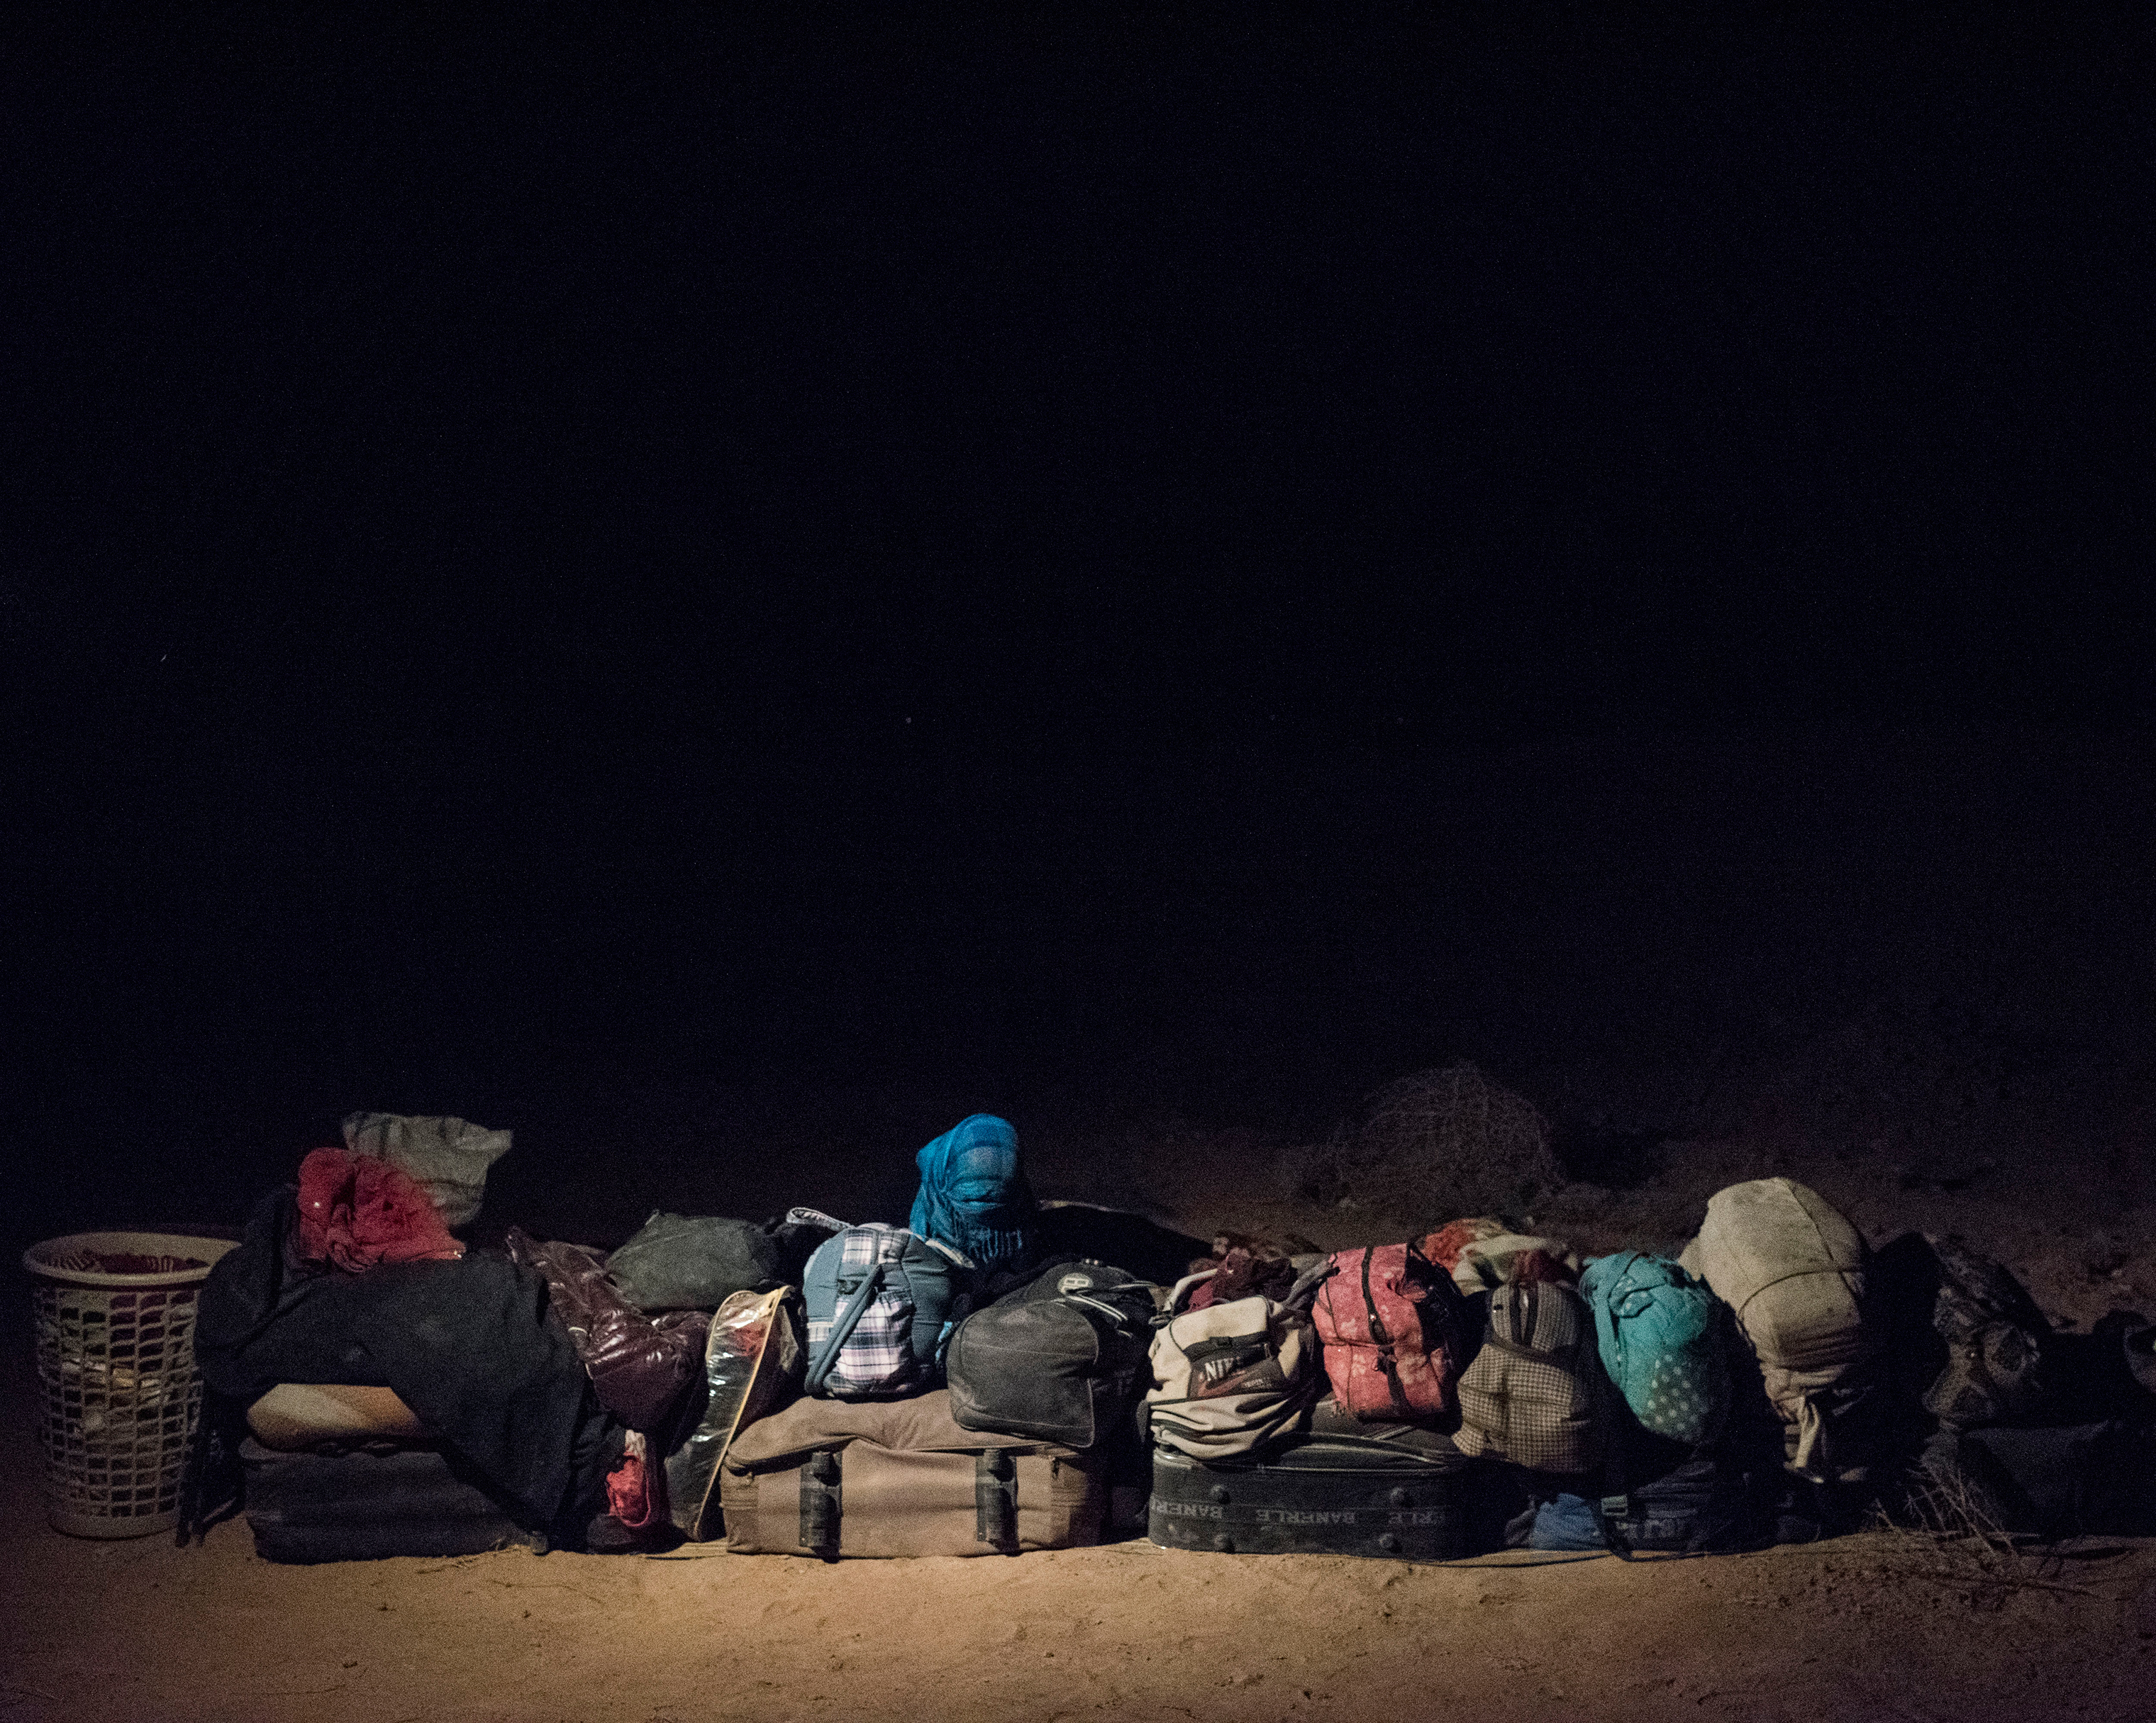 The belongings of refugees sleeping in the Syrian desert, on the outskirts of Deir ez-Zor. (Lorenzo Meloni—Magnum Photos)